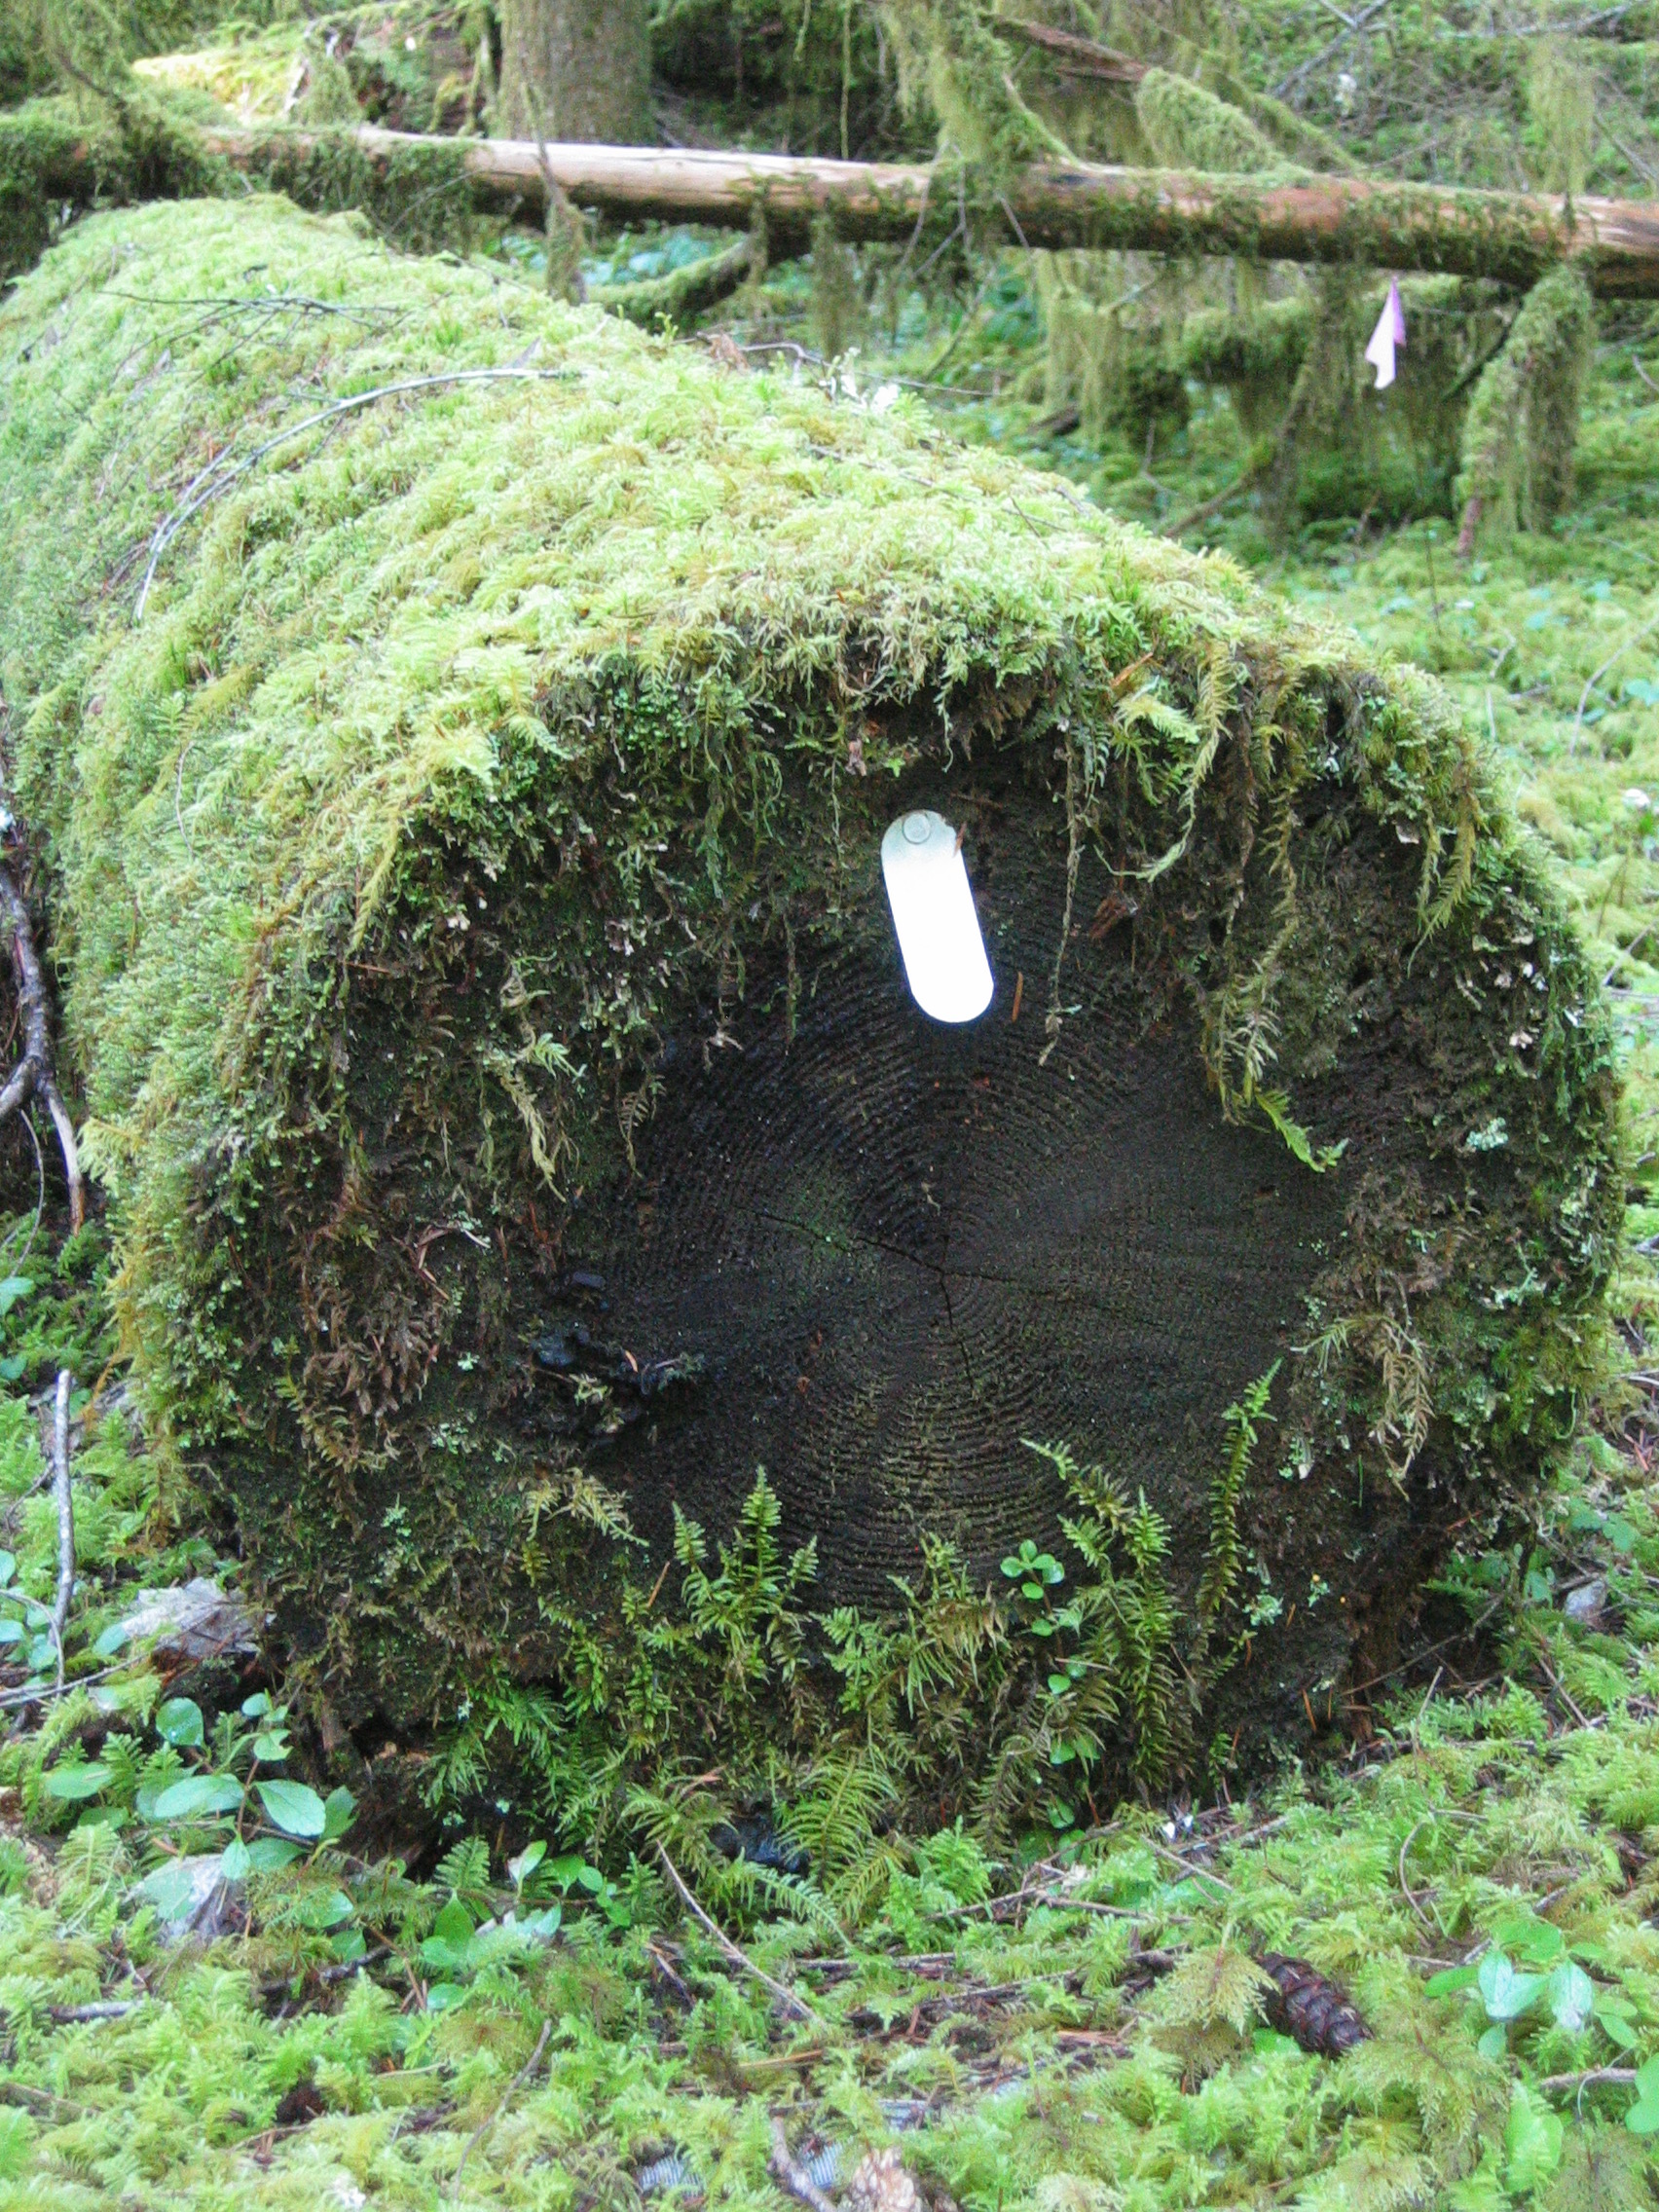 Mossy log with id tag